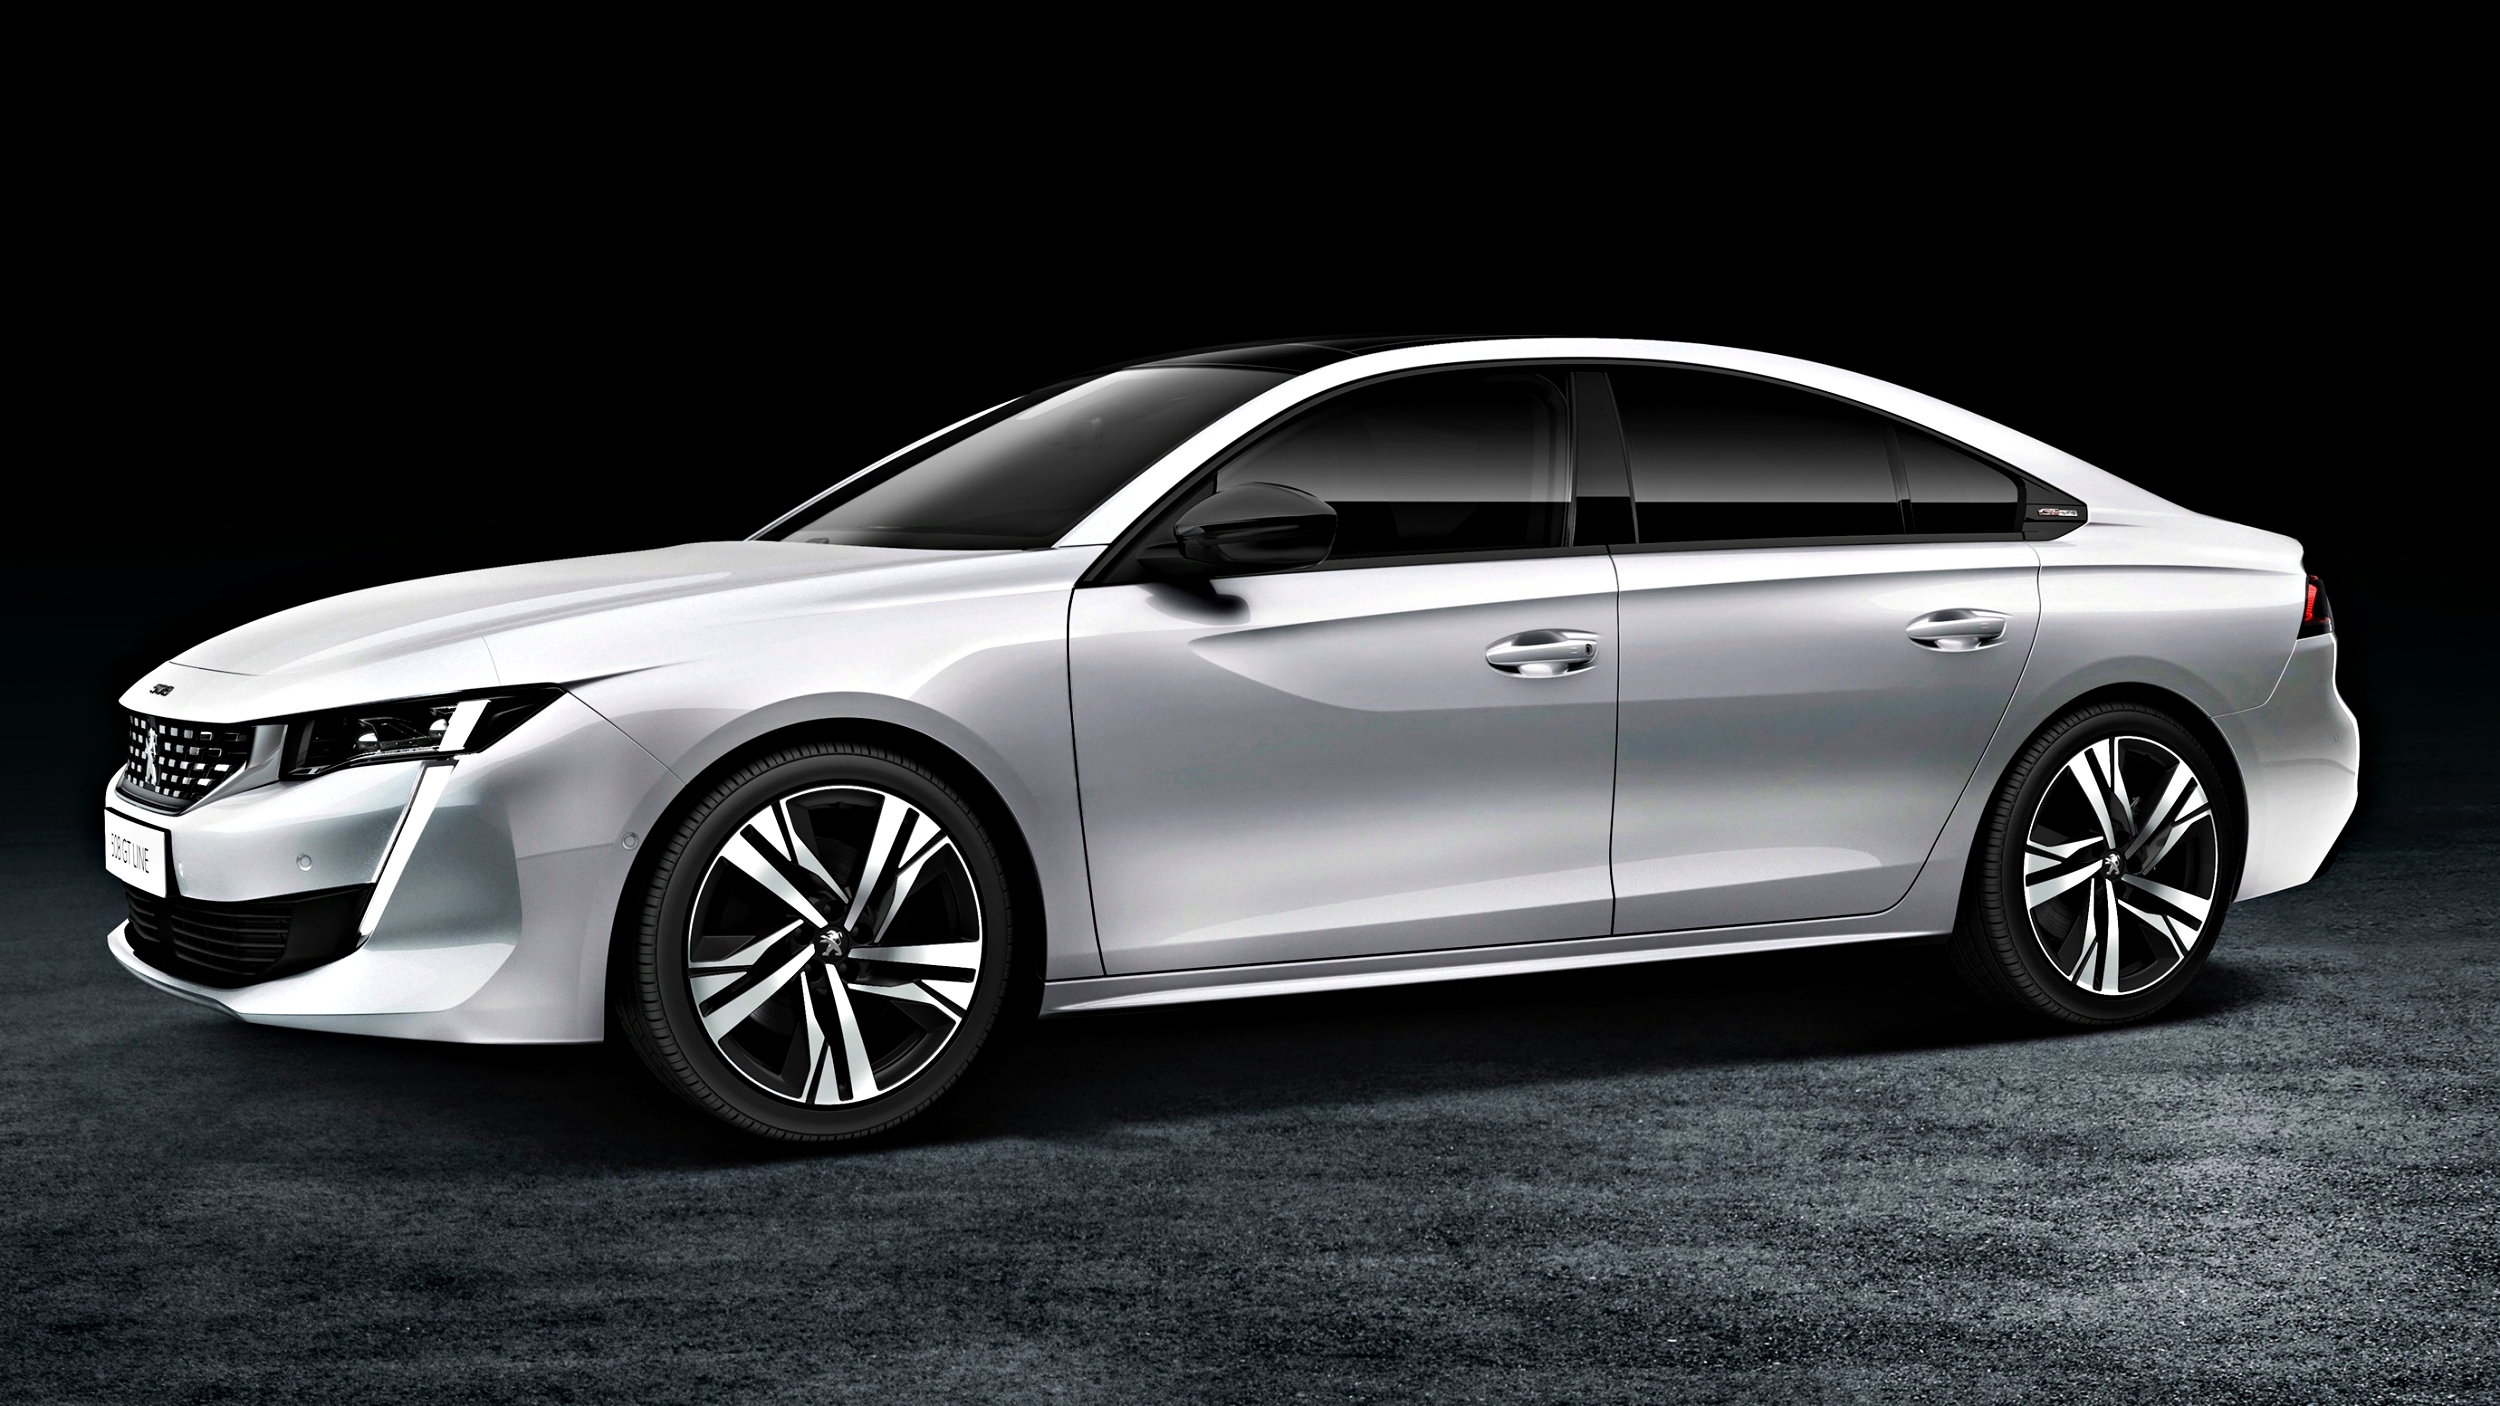 News - 2019 Peugeot 508 Outed As Foxy 5-Door Fastback